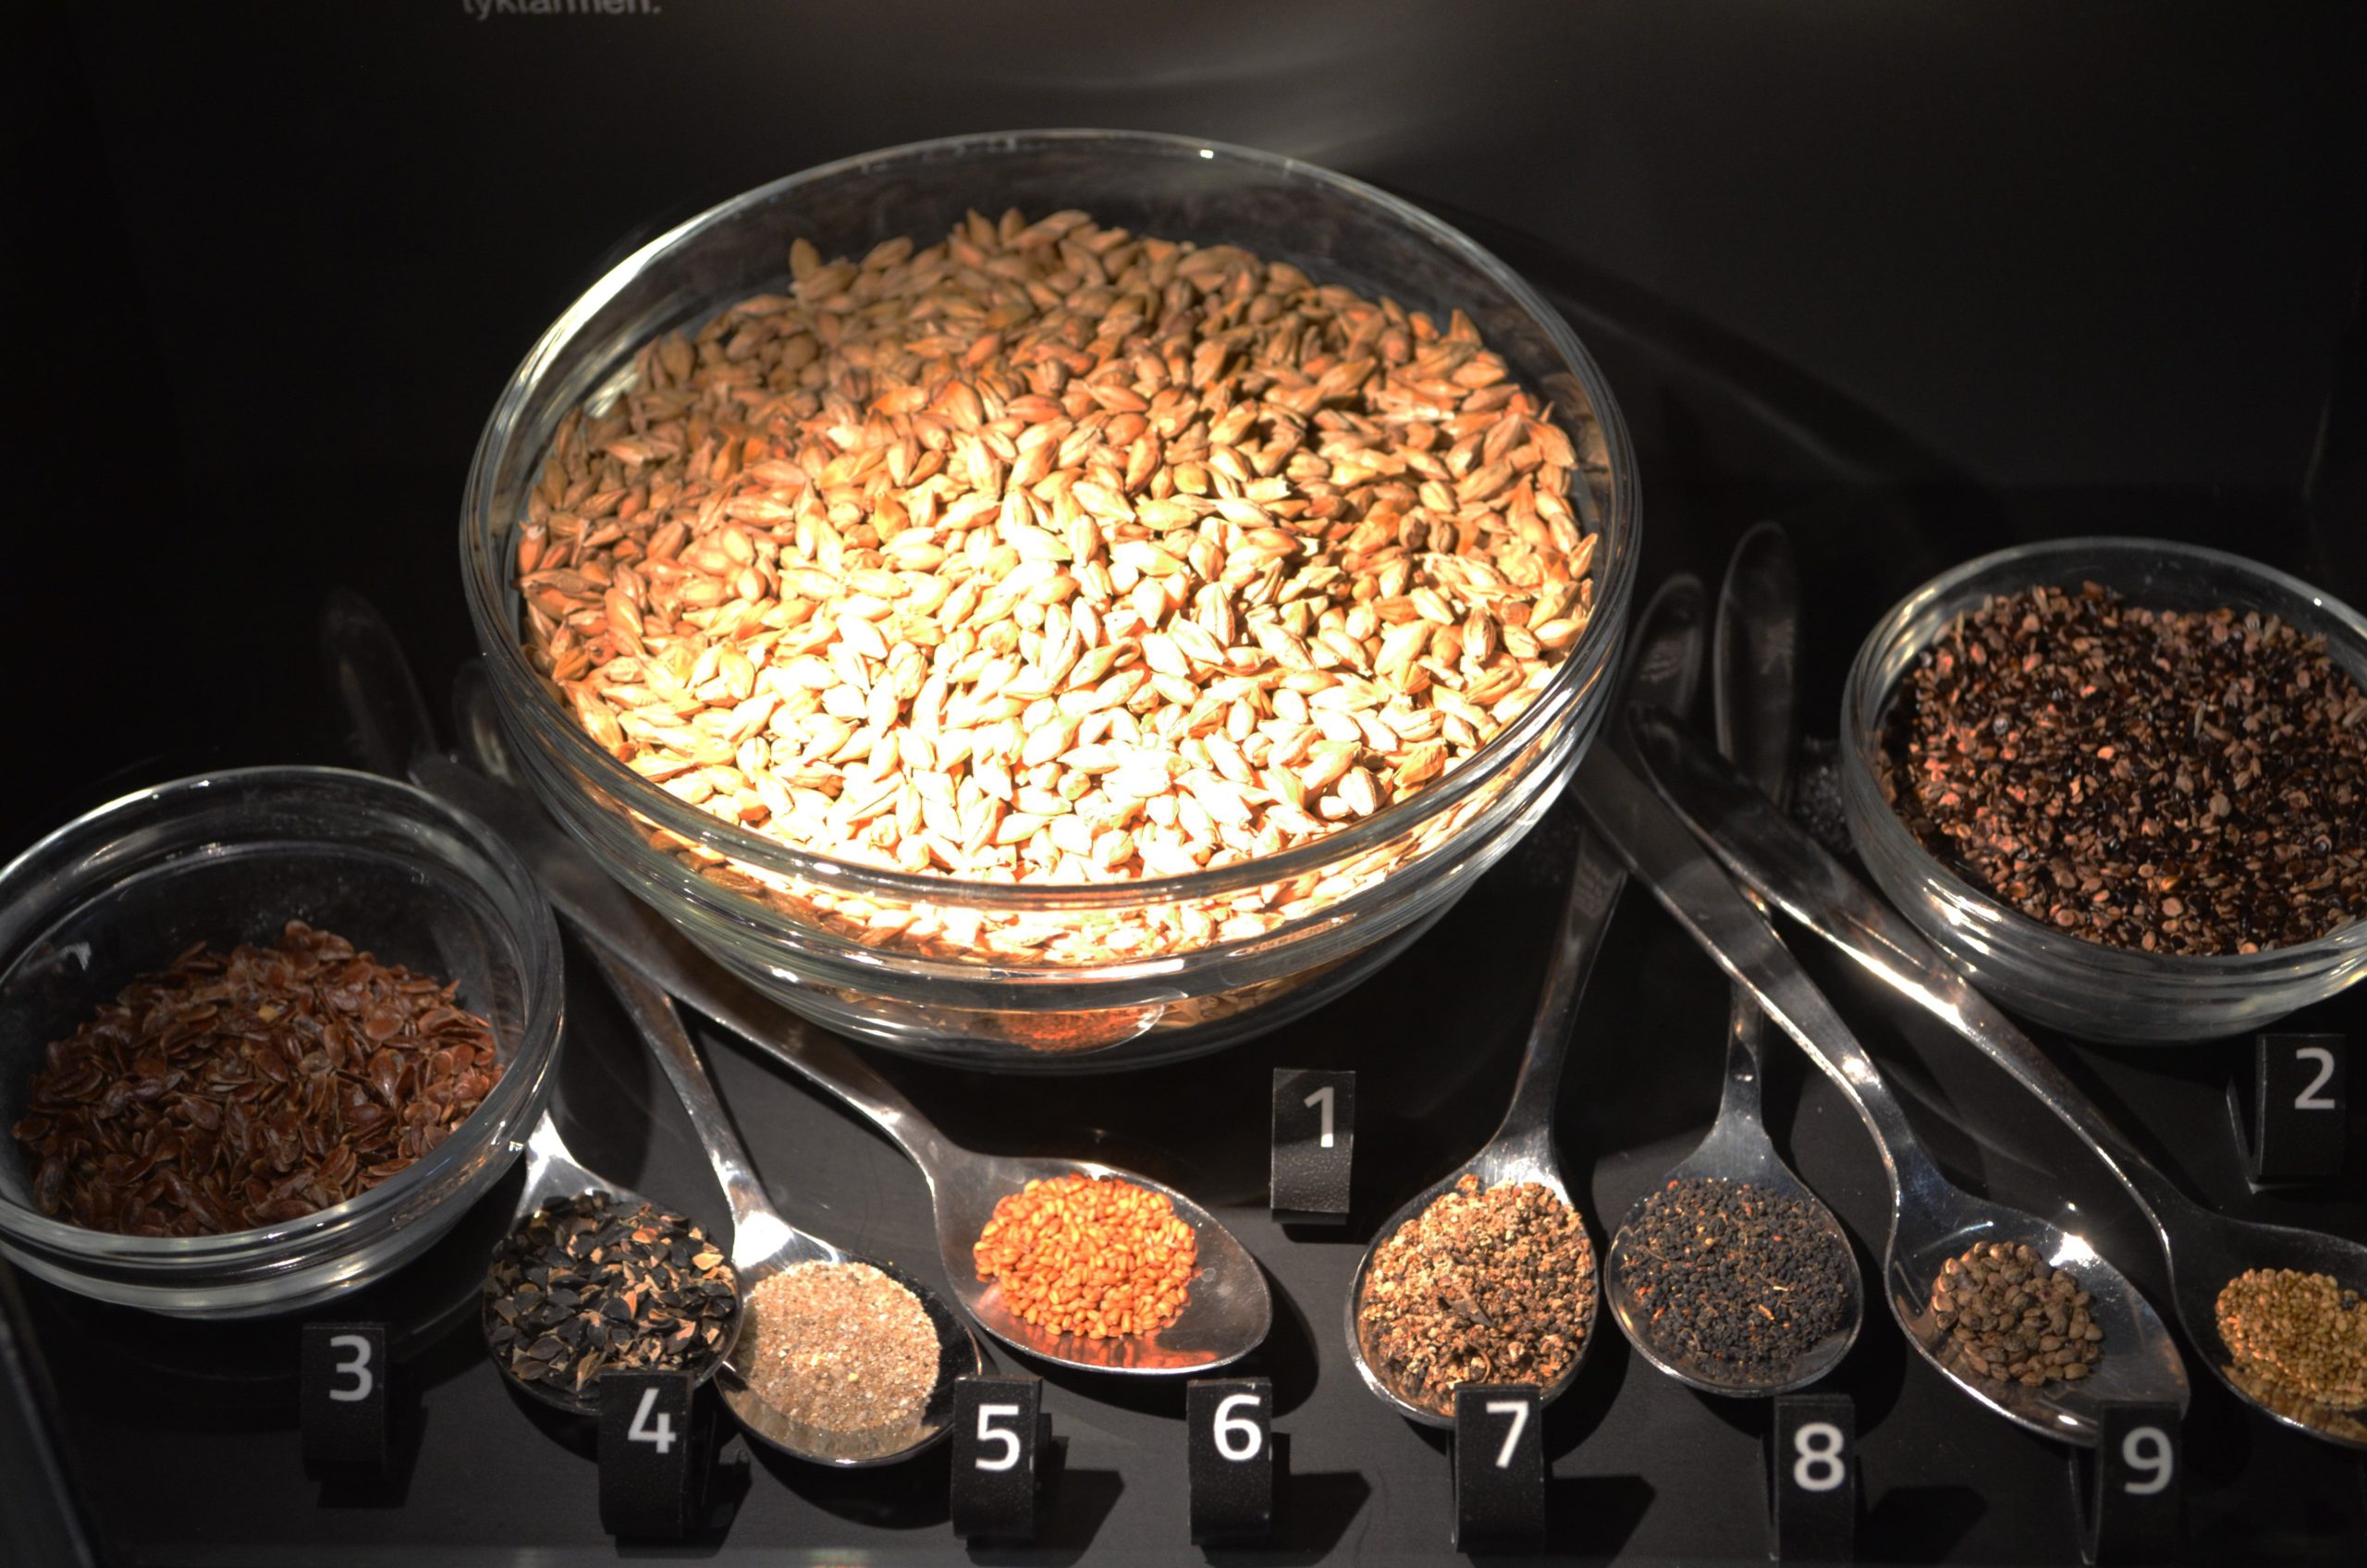 The main ingredients — not including the fish — in Tollund Man's last meal (shown in their relative quantities: 1) Barley, 2) pale persicaria, 3) flax, 4) black-bindweed, 5) sand, 6) gold-of-pleasure, 7) fat hen, 8) corn spurrey, 9) hemp-nettles and 10) field pansy. (Image: Museum Silkeborg)